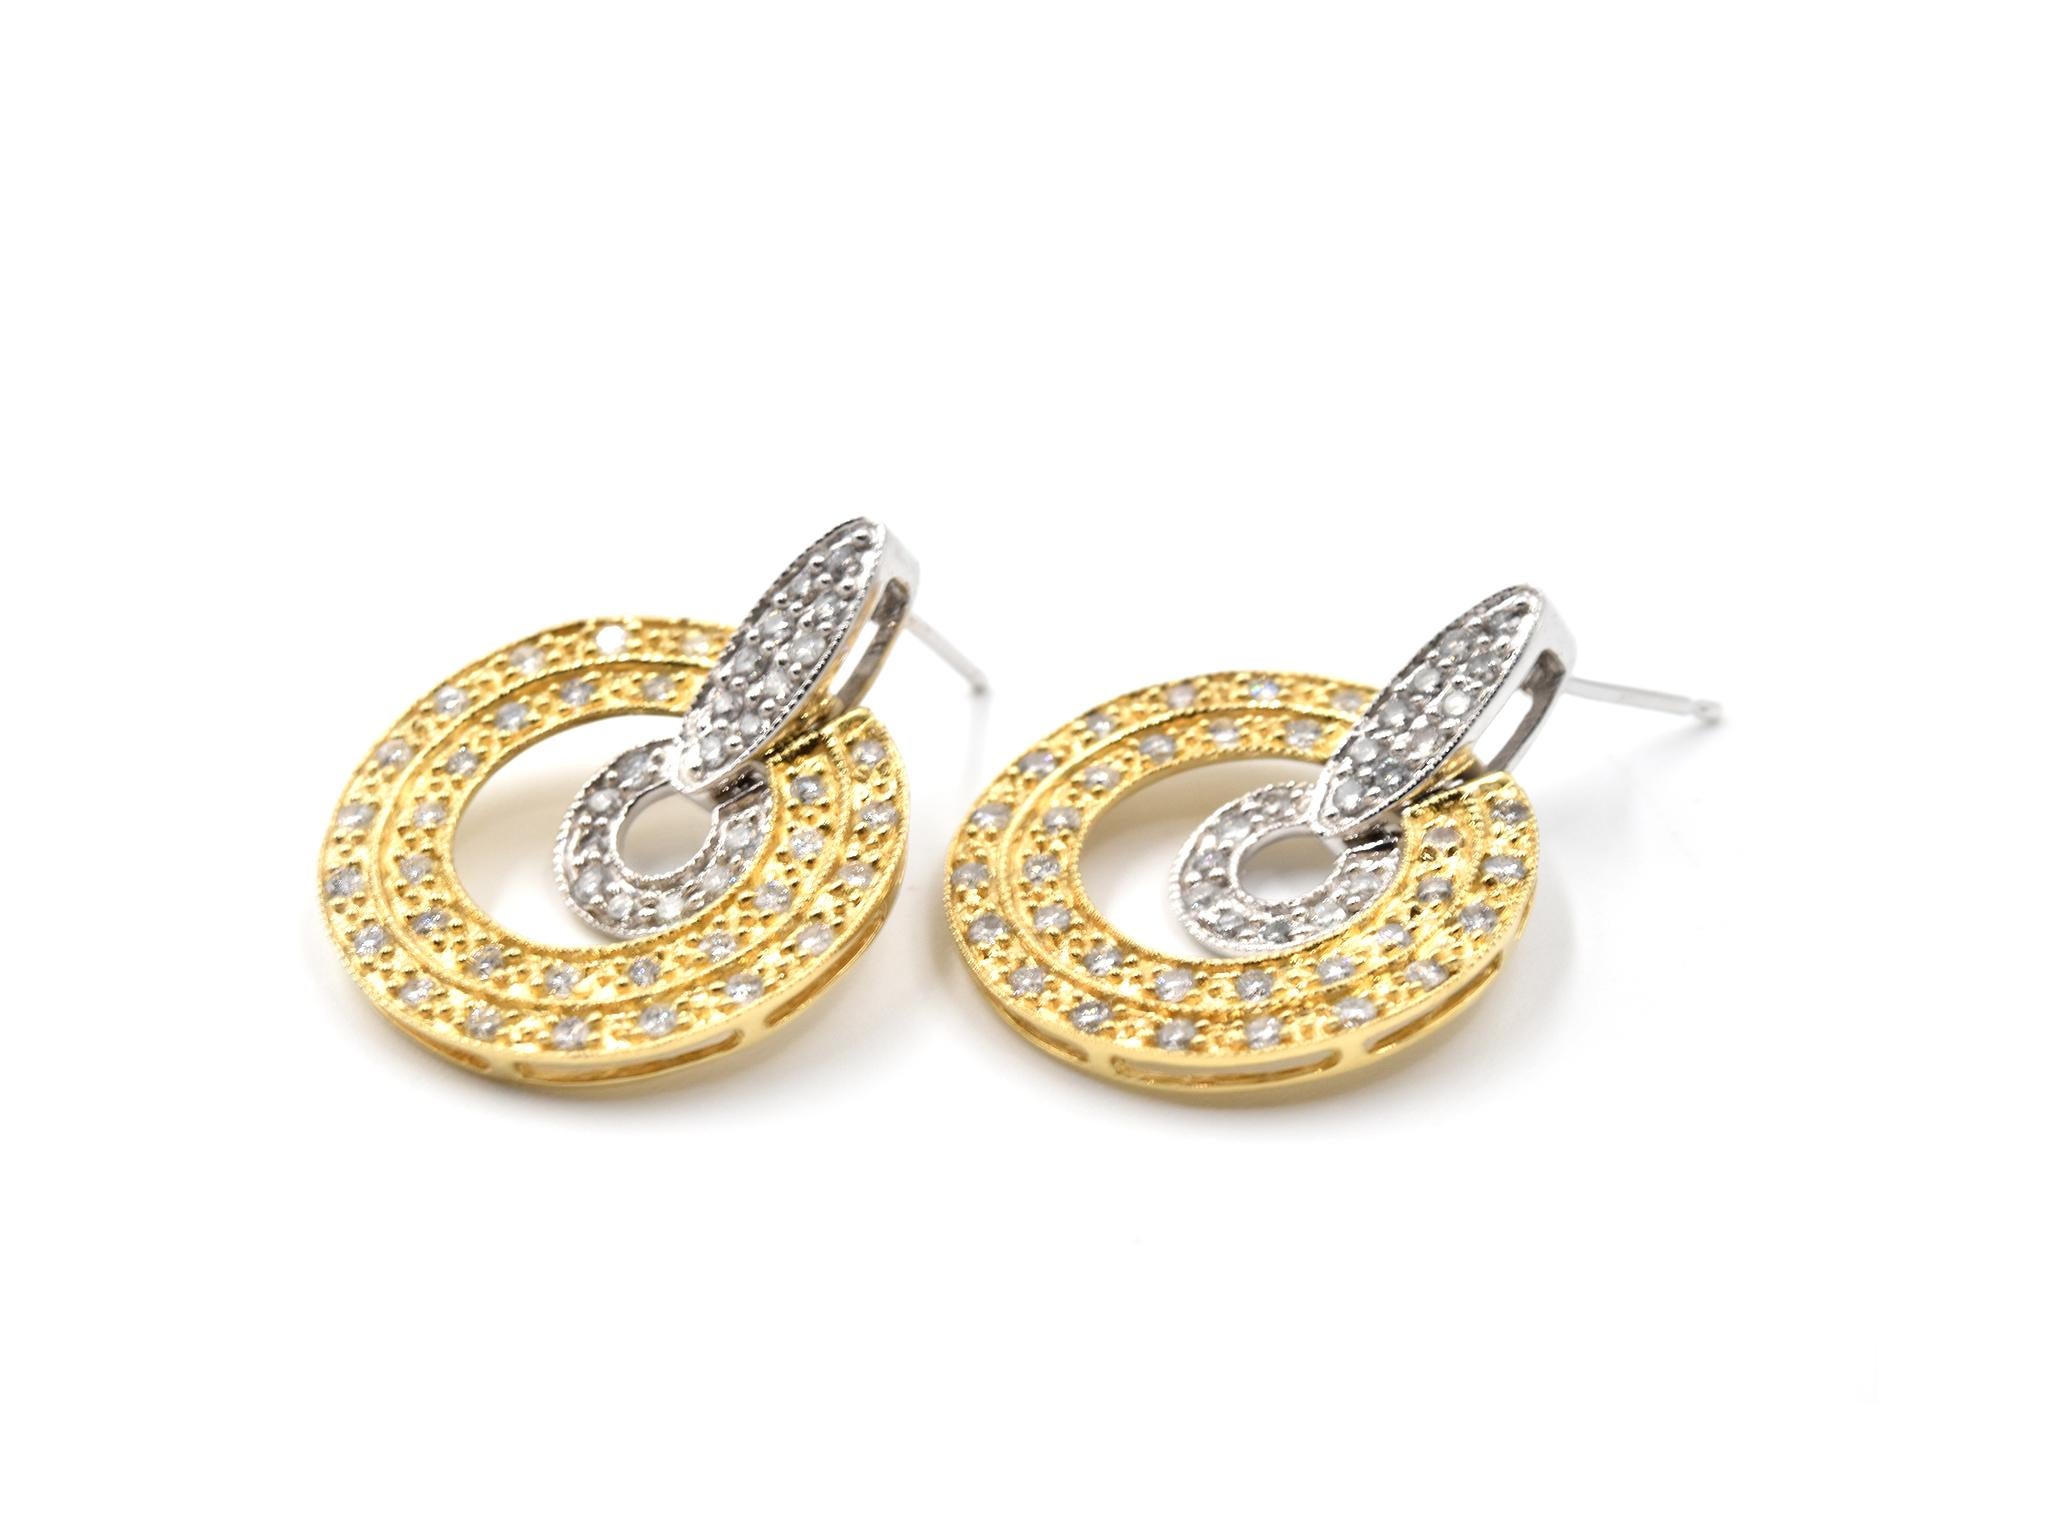 Designer: custom design
Material: 14k white and yellow gold
Diamonds: 98 round brilliant cut = 1.00 carat weight
Color: G-H
Clarity: SI1
Dimensions: each earring is 1-inch long and 3/4-inch wide
Fastenings: friction backs
Weight: 5.96 grams
